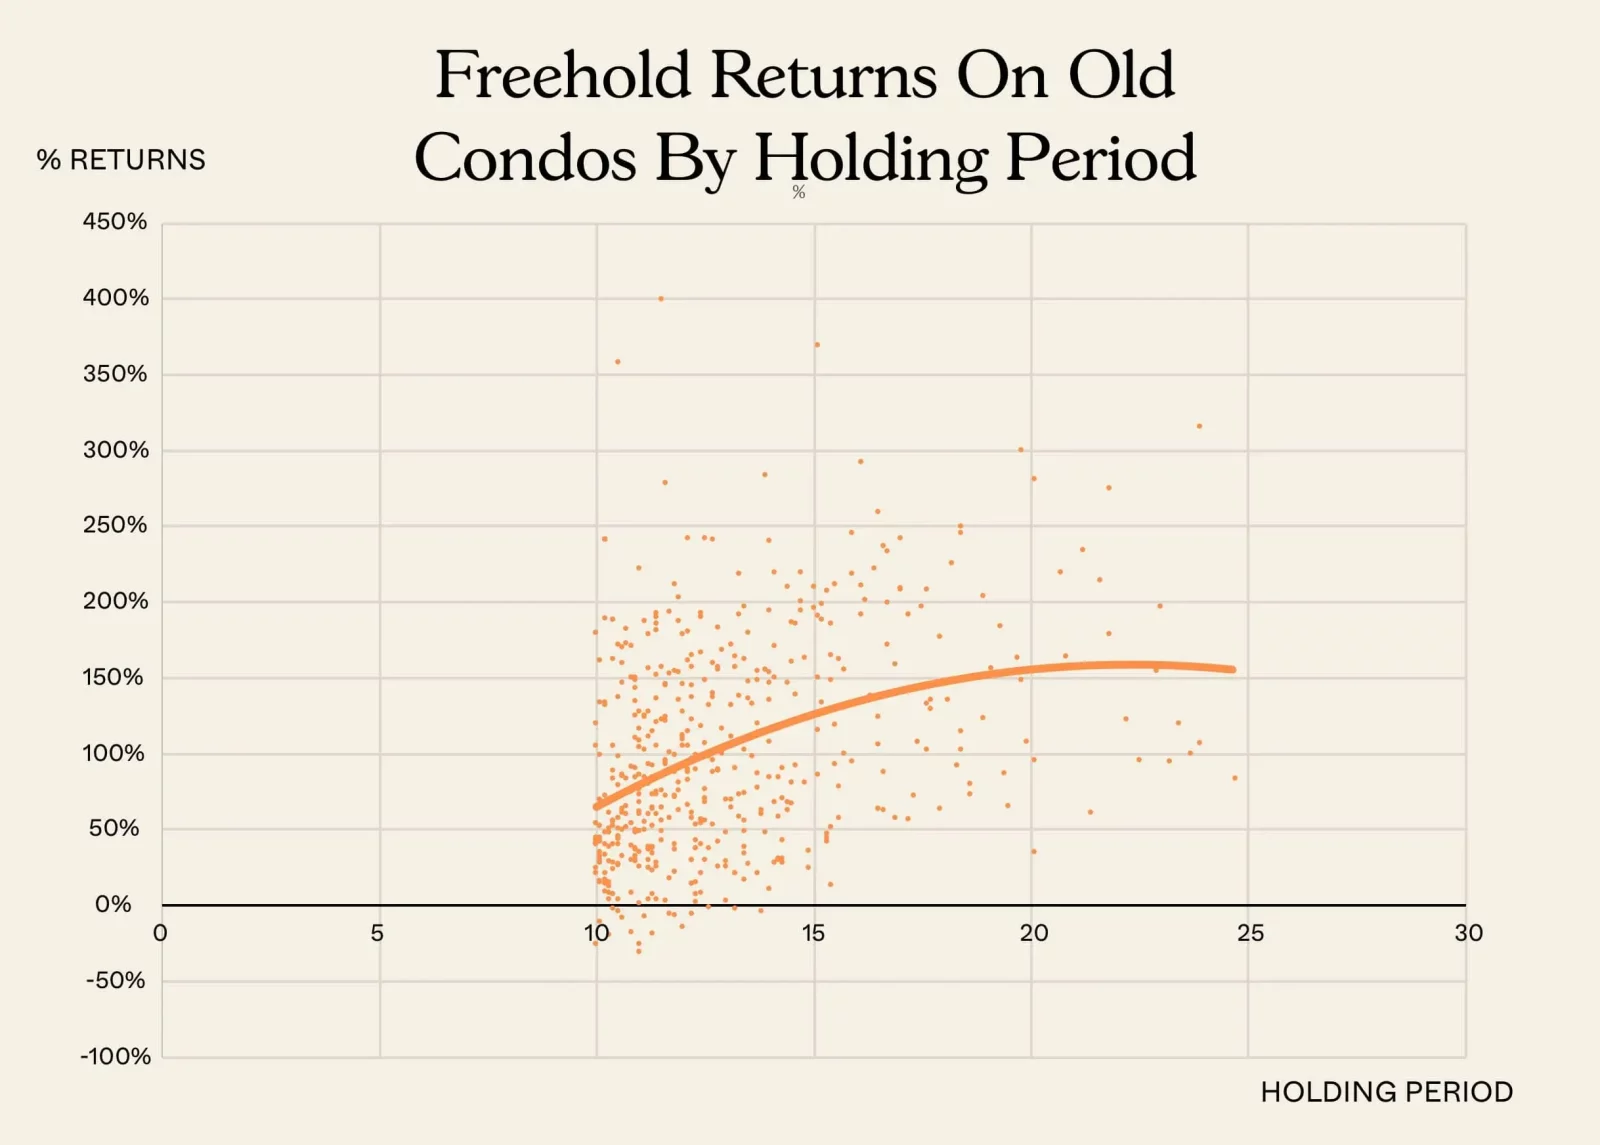 Freehold Returns On Old Condos By Holding Period